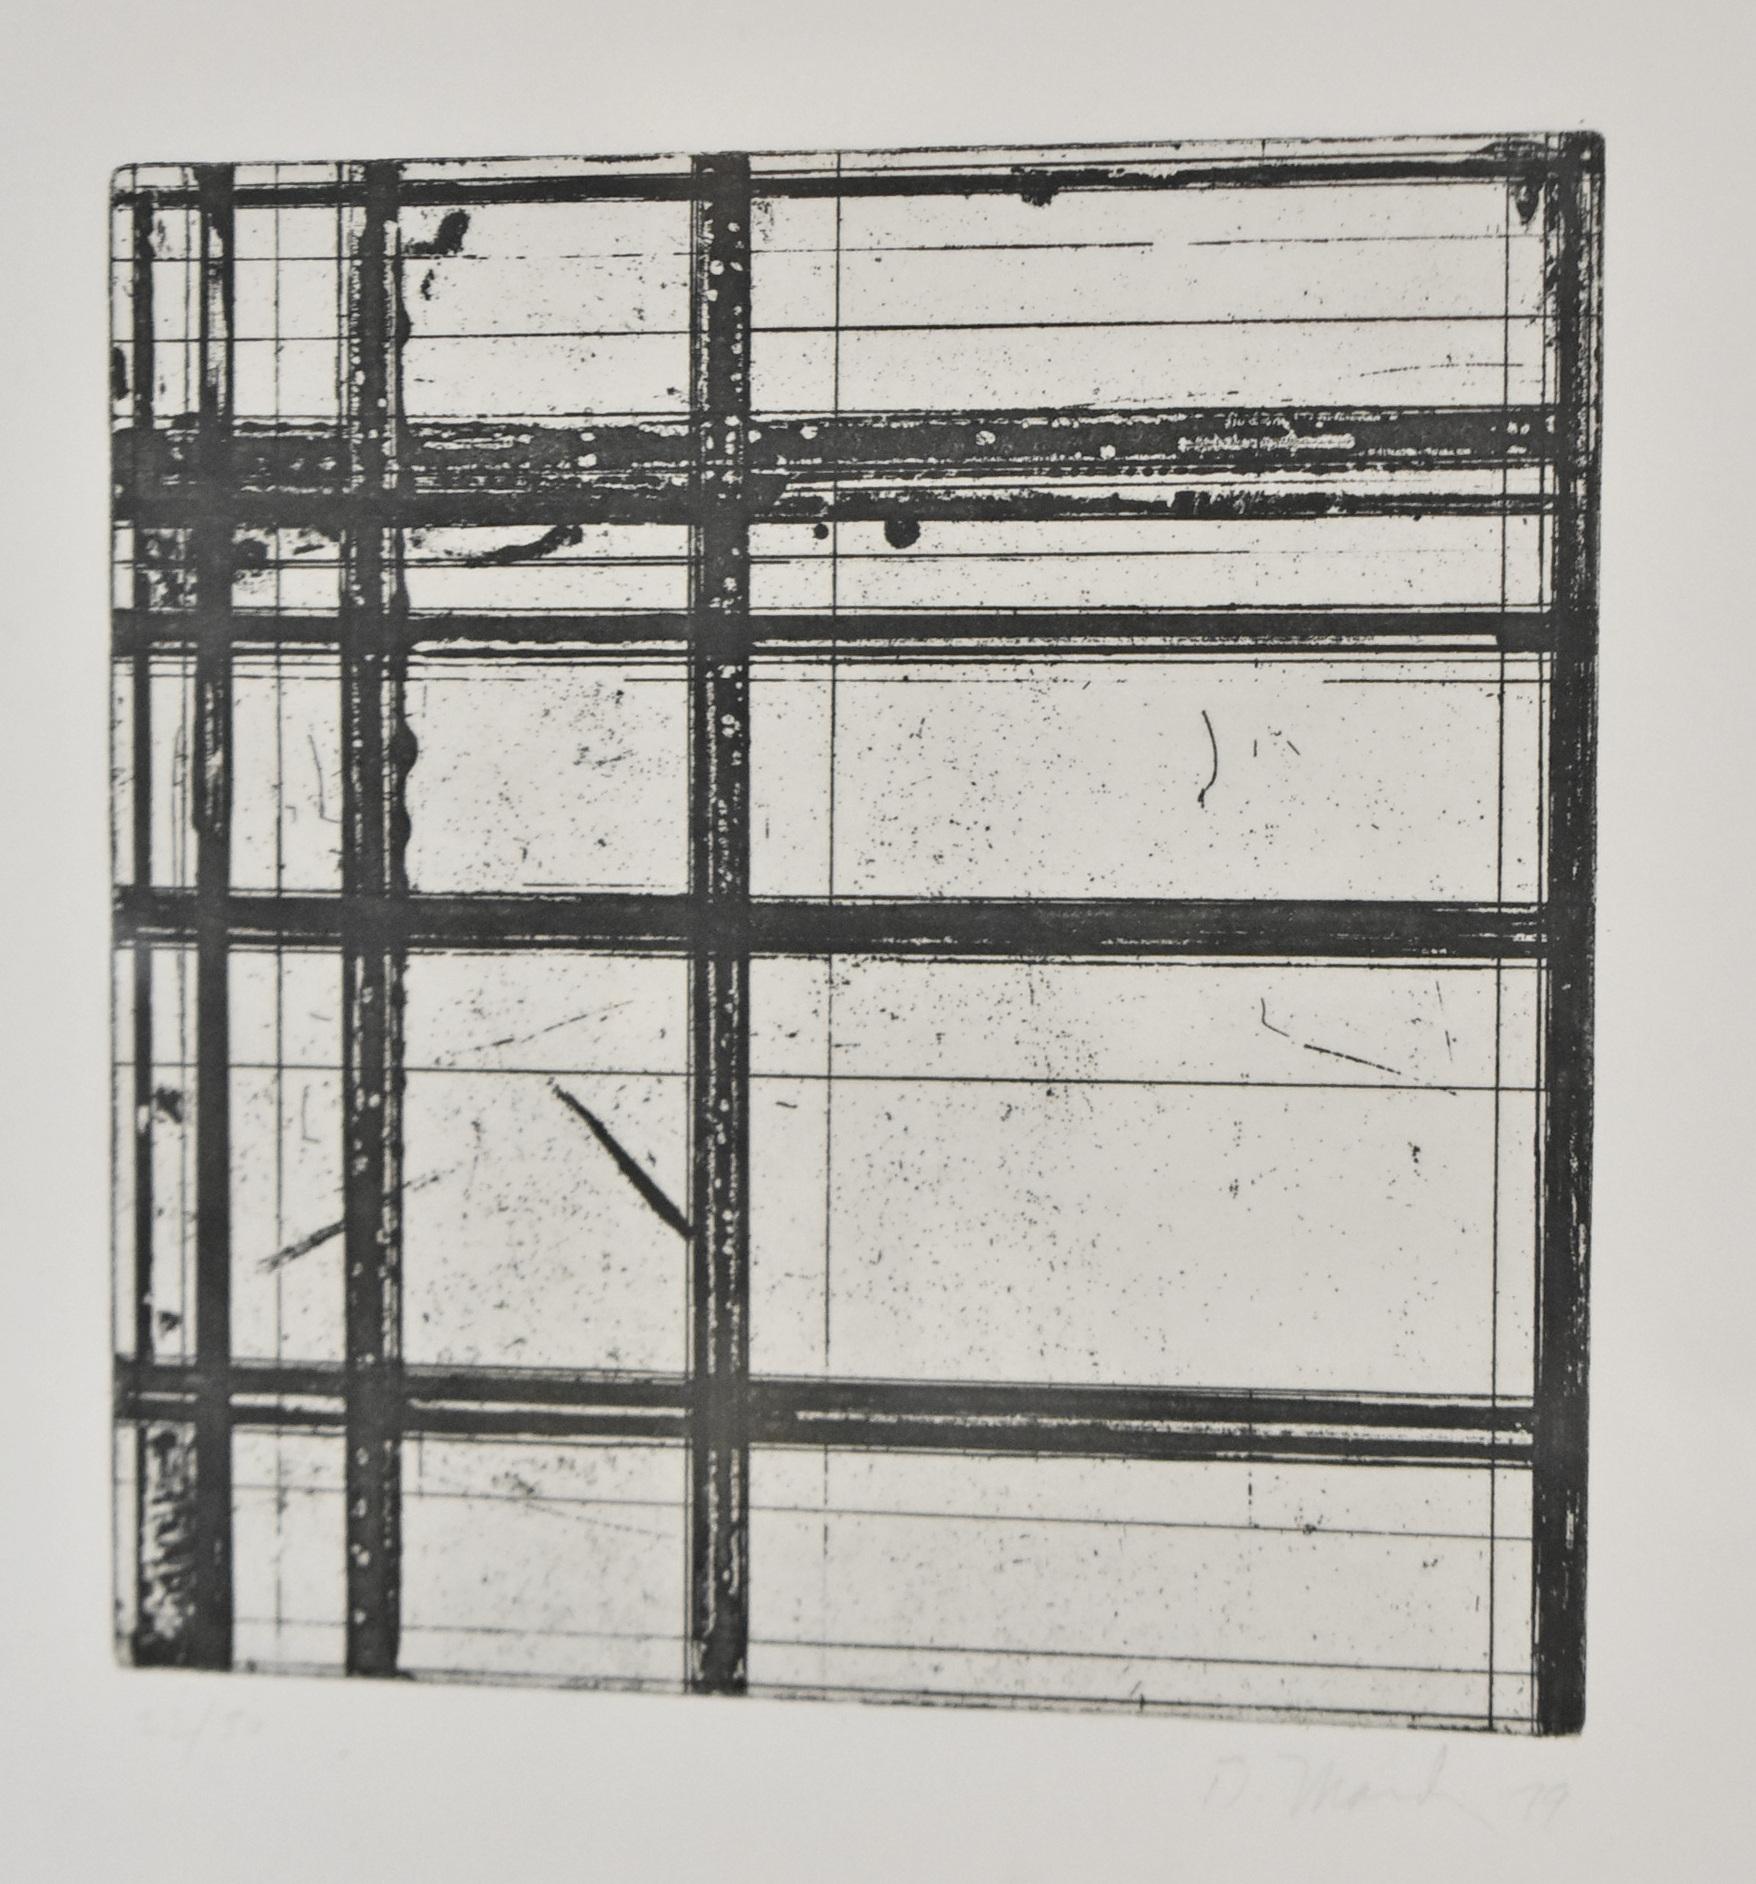 Etched Brice Marden Set of 4 Etching Tiles, 1979 For Sale